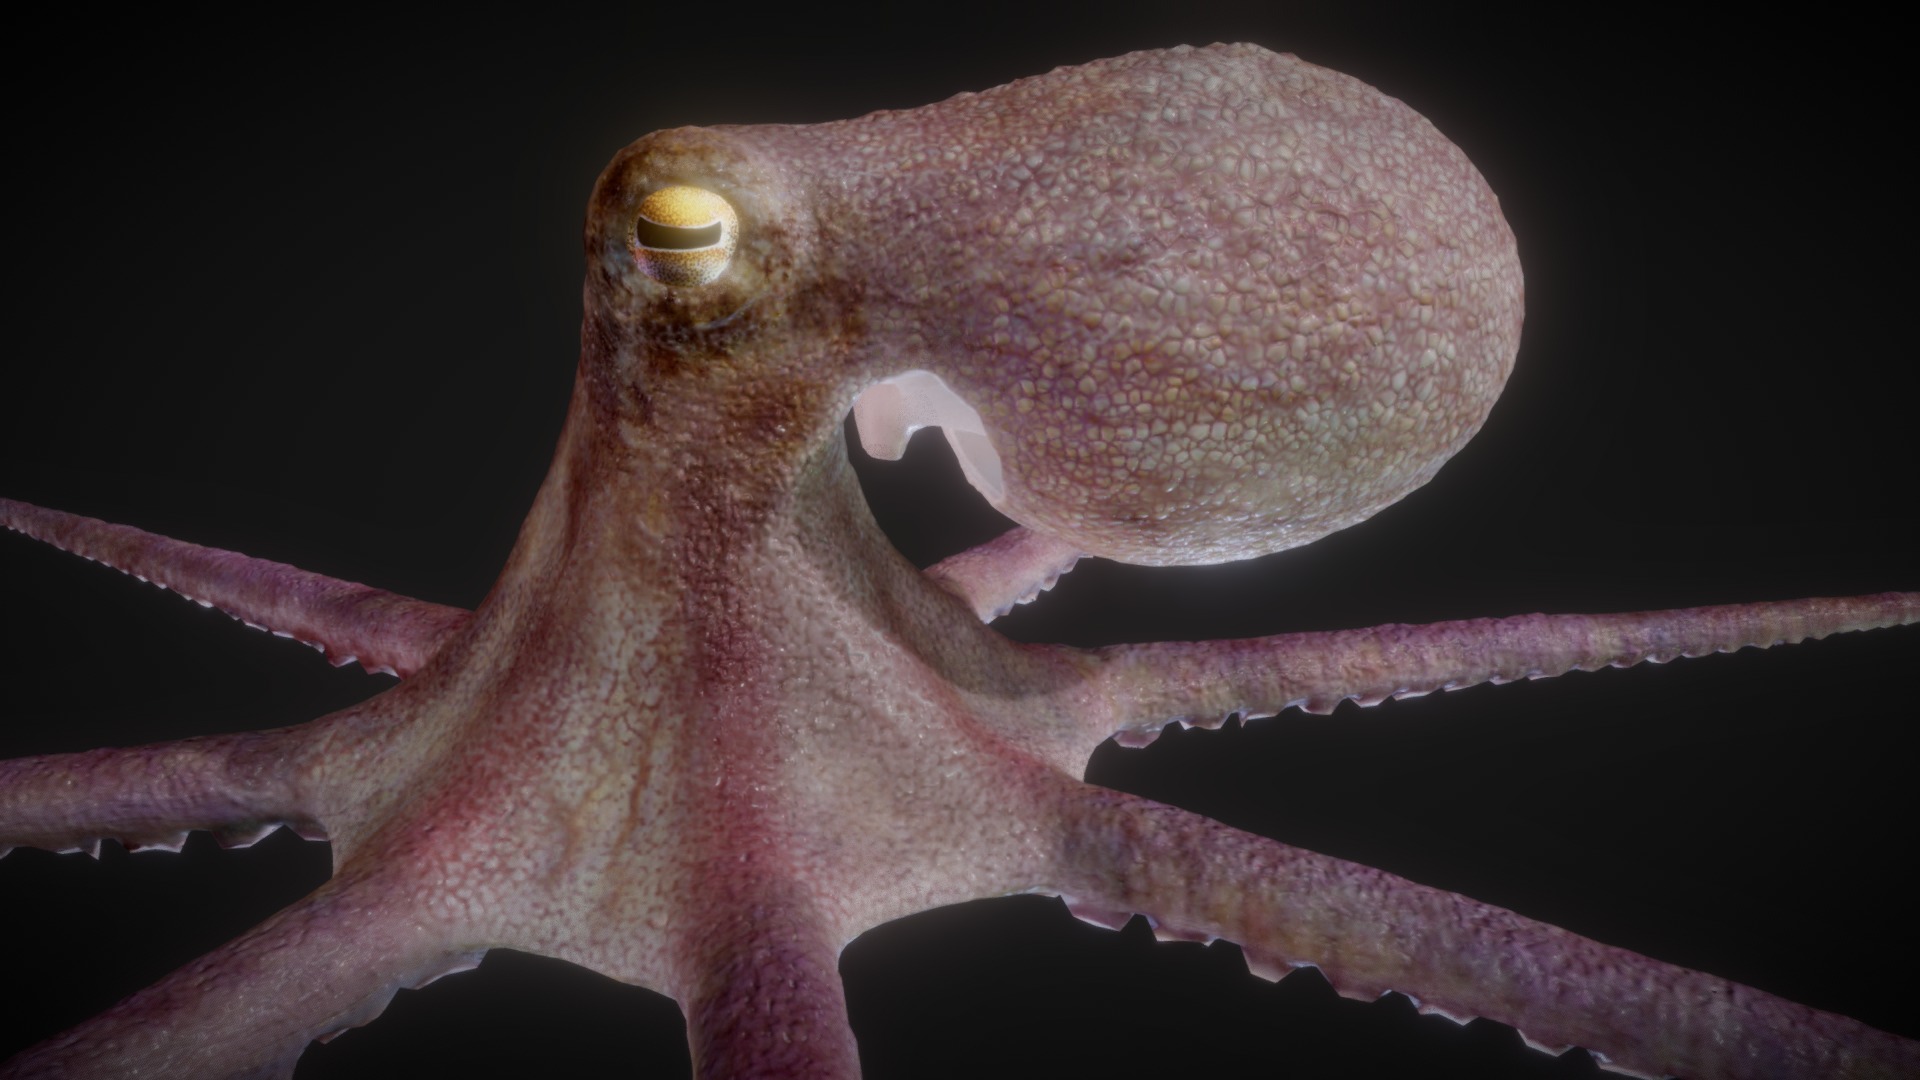 I'm re-doing the octopus. Within a few weeks I will receive a whole octopus again to dissect. want to make a full infographic of it 3d model